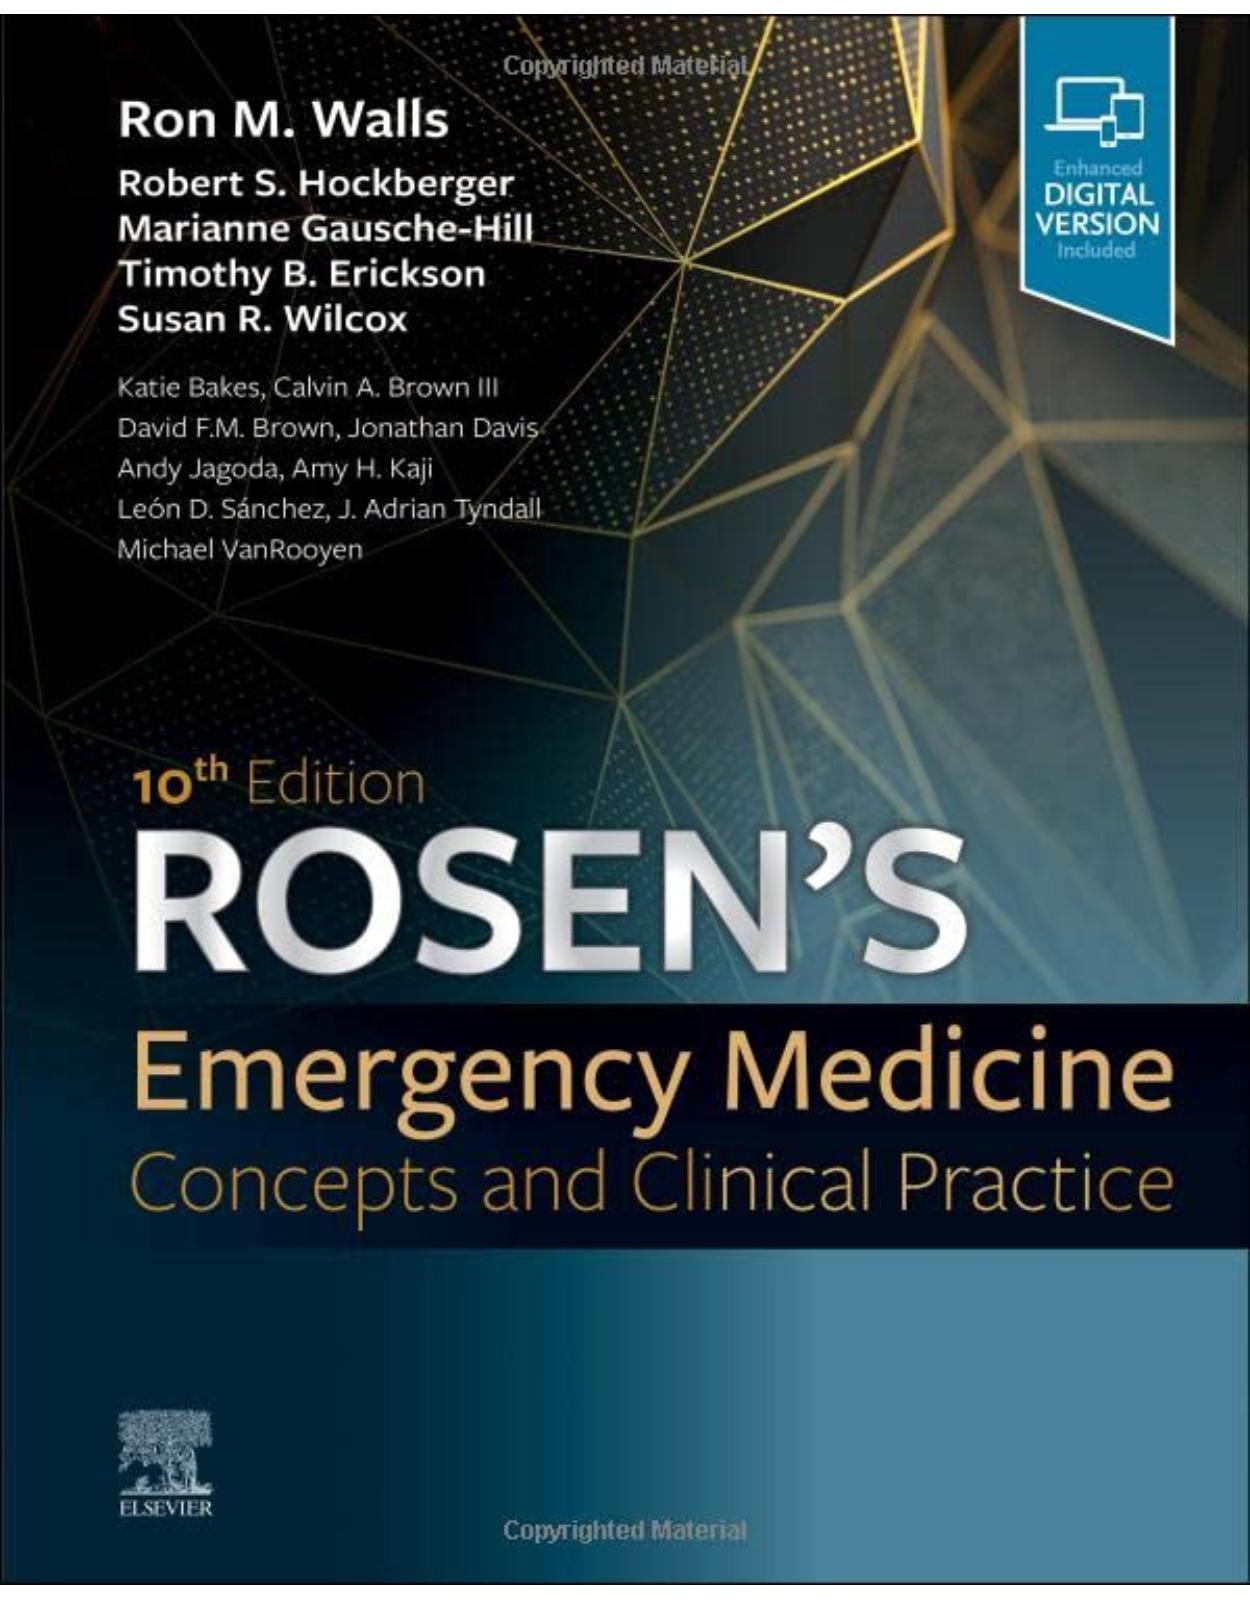 Rosen’s Emergency Medicine: Concepts and Clinical Practice: 2-Volume Set